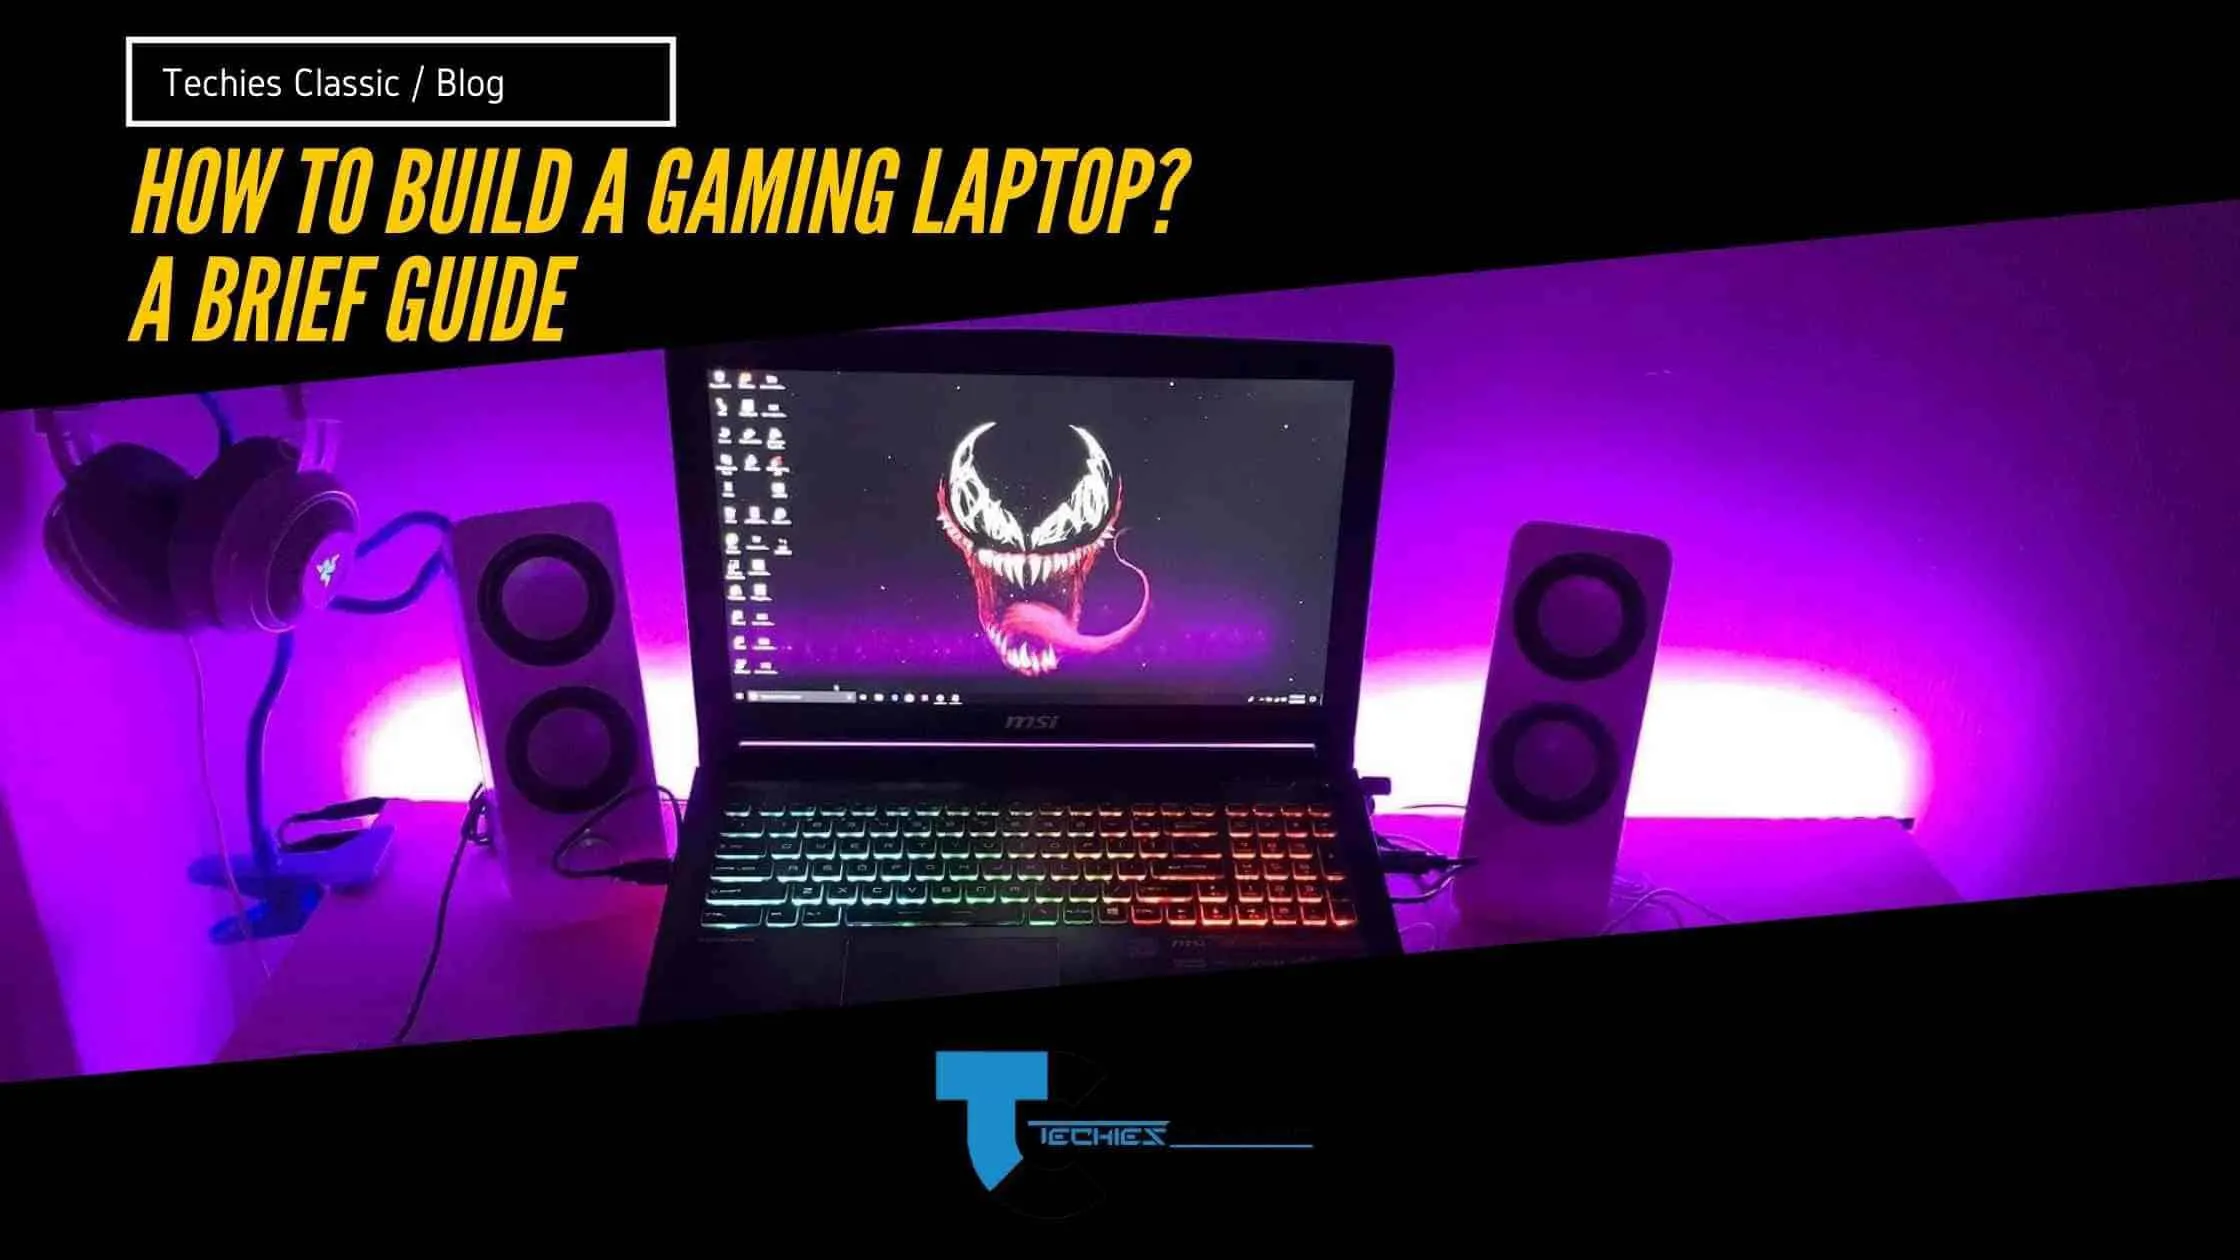 How To Build A Gaming Laptop in 2023?